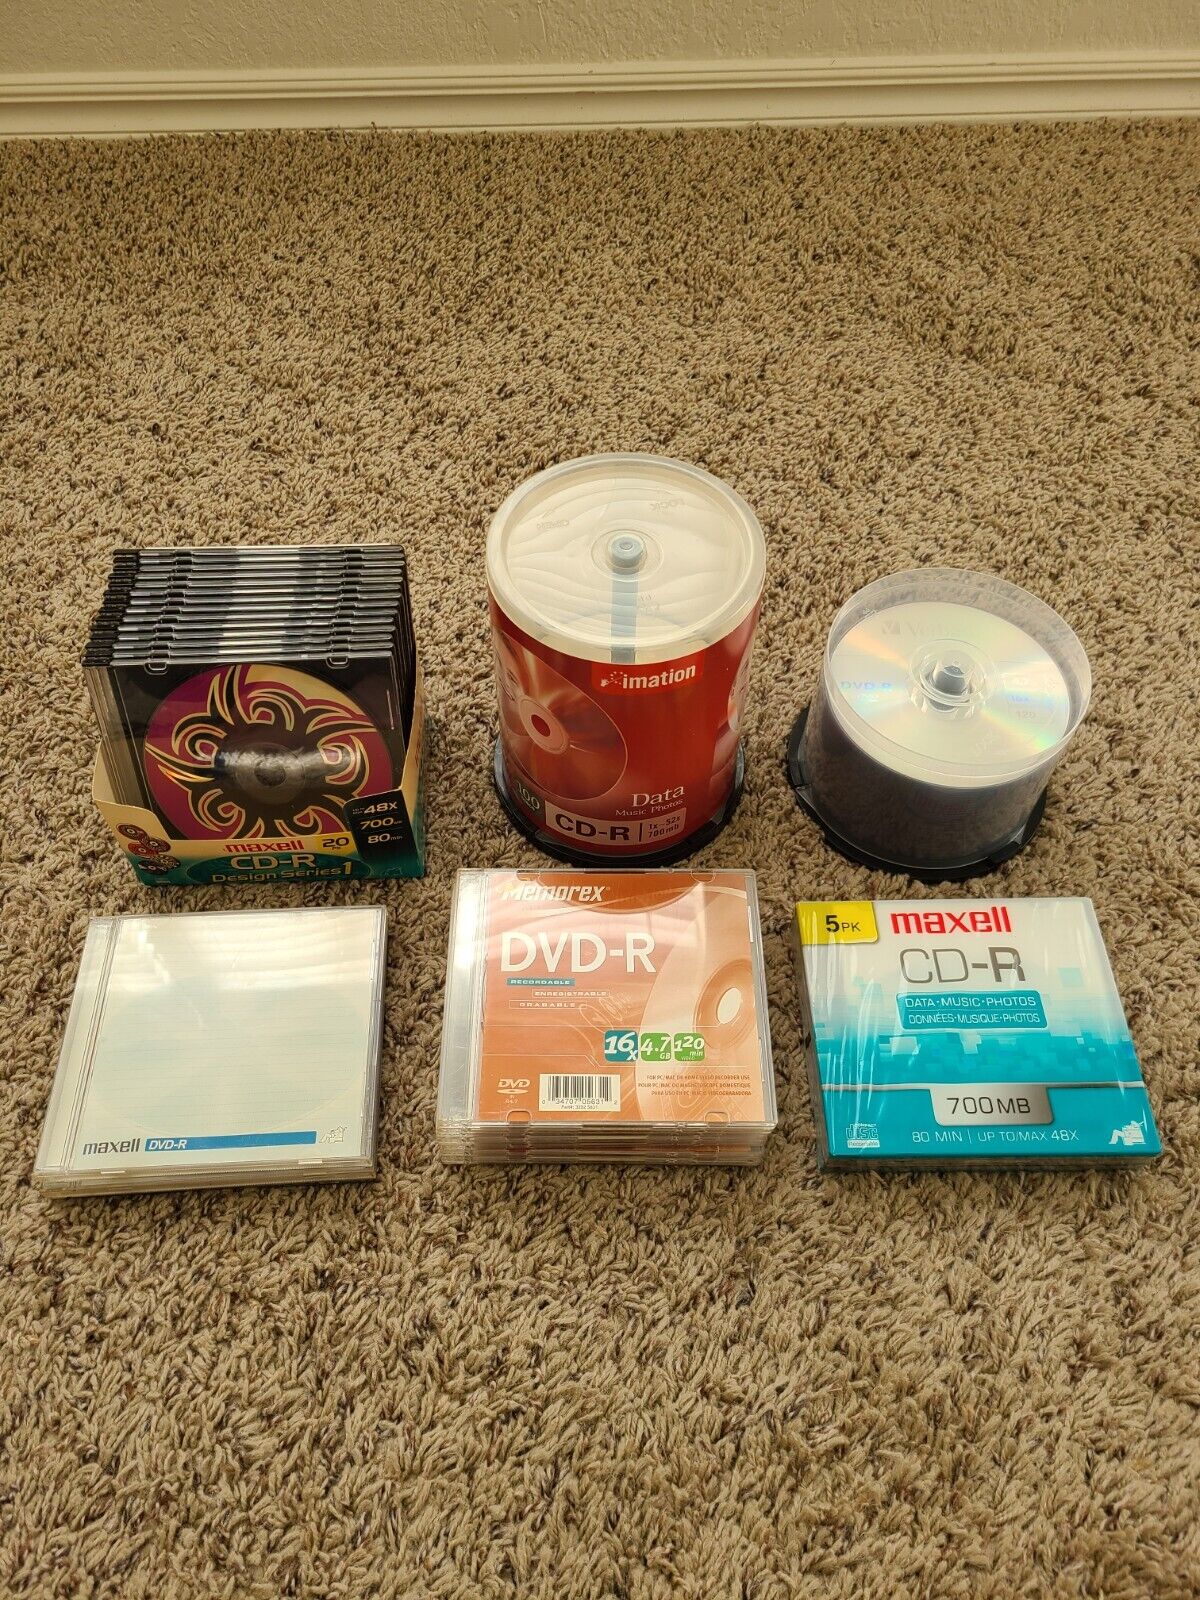 Maxell CD-R, CD-R Design, DVD-R, Plus Others Lot 